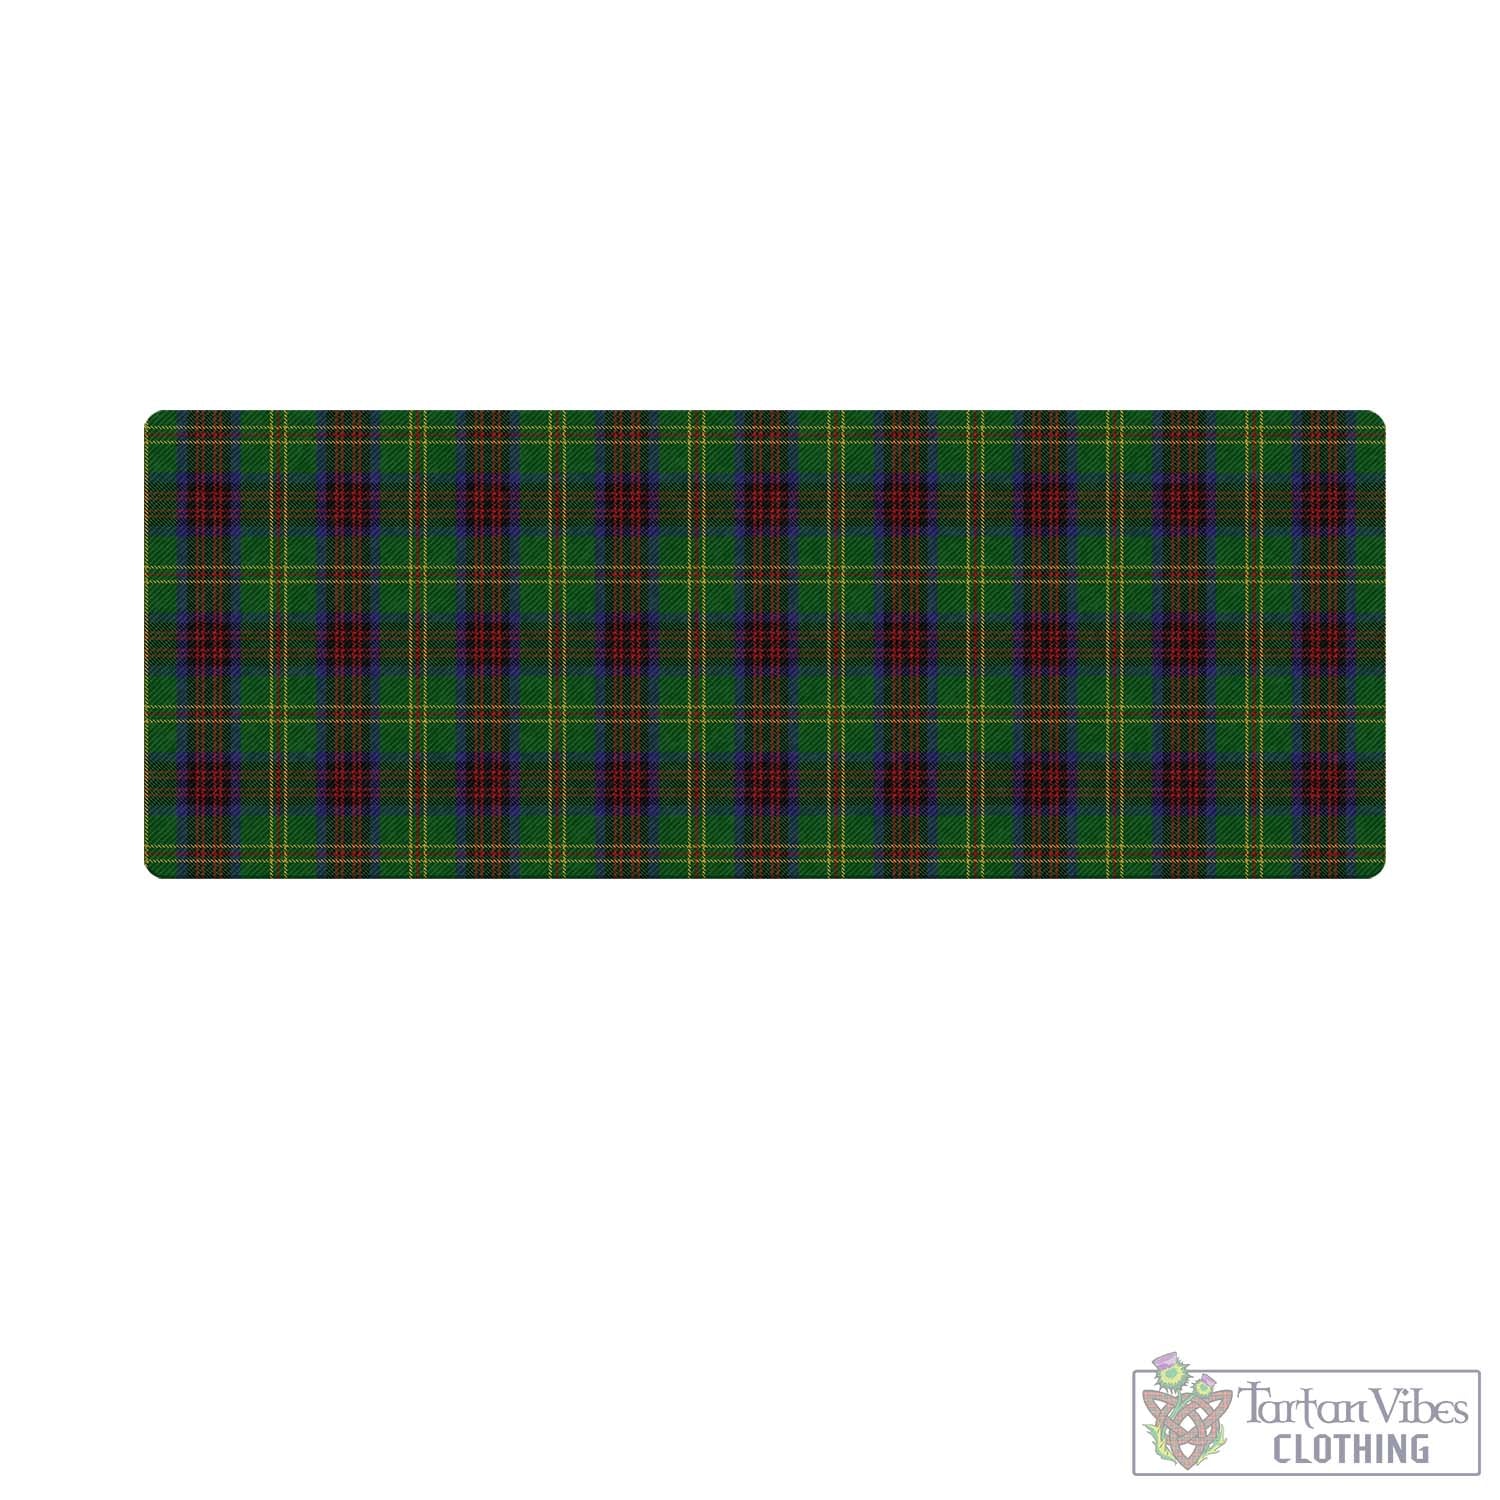 Tartan Vibes Clothing Connolly Hunting Tartan Mouse Pad